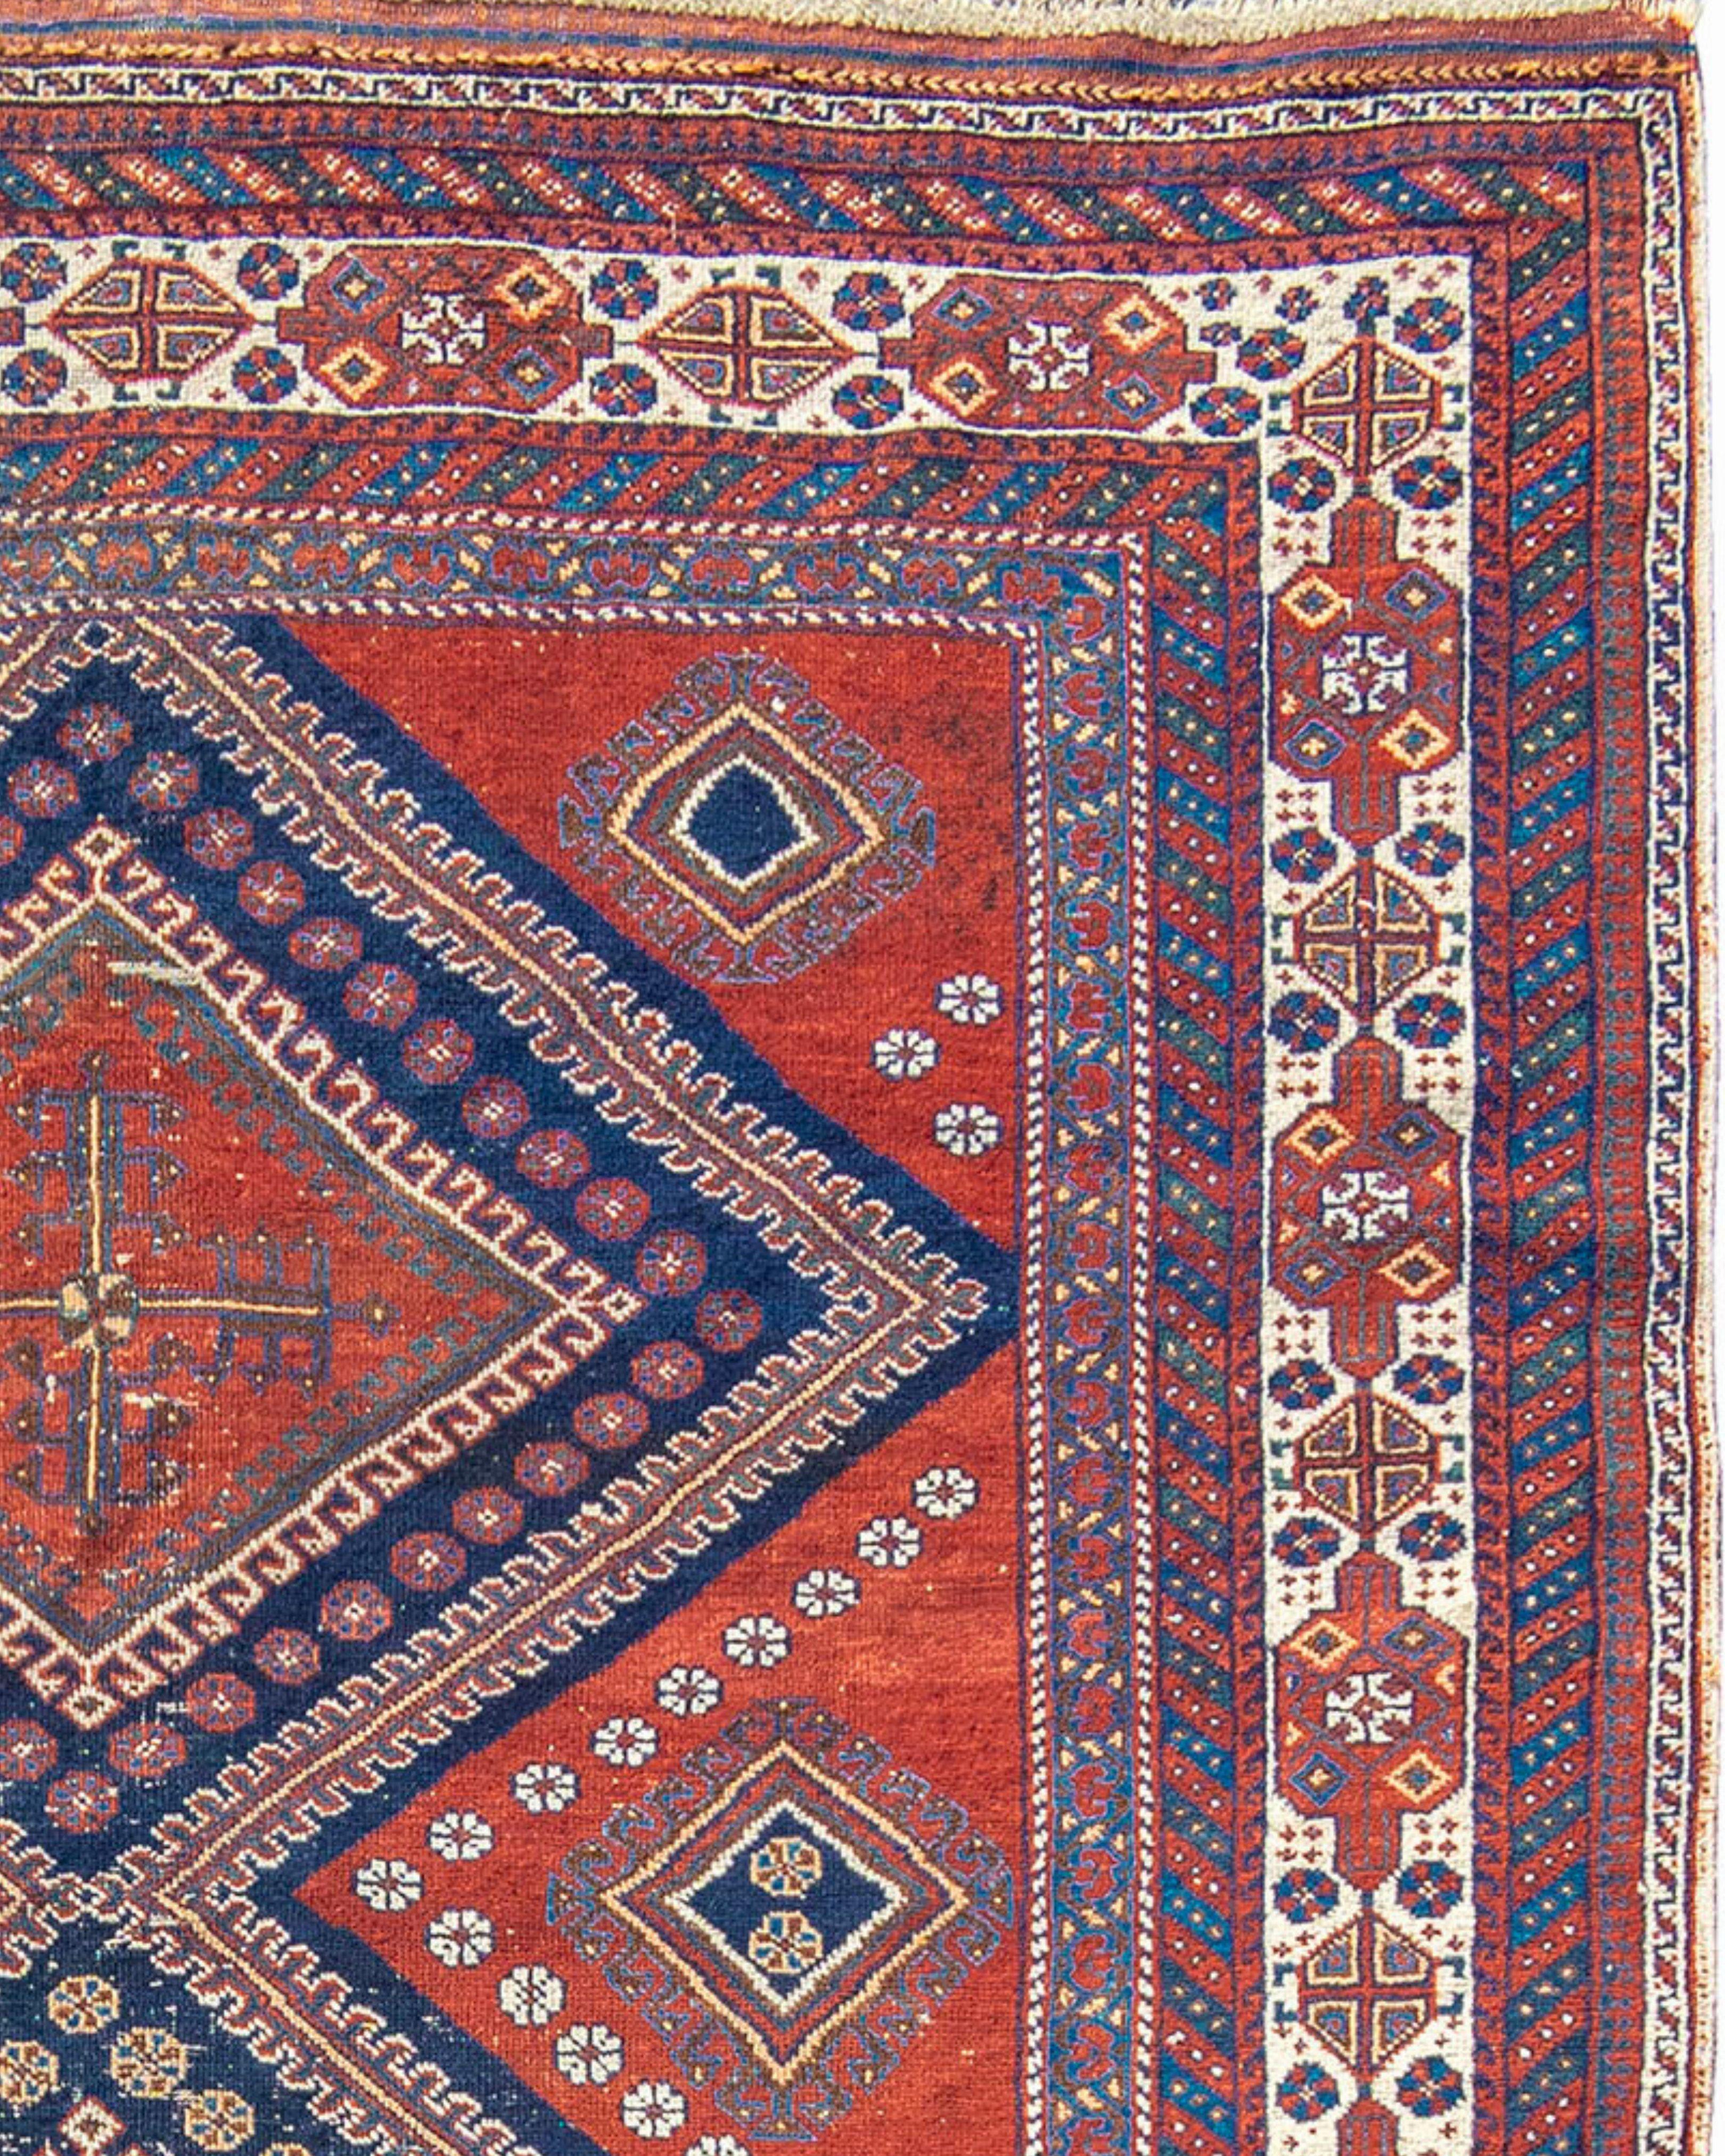 Antique Persian Afshar Rug, c. 1900

Additional Information:
Dimensions: 4'6